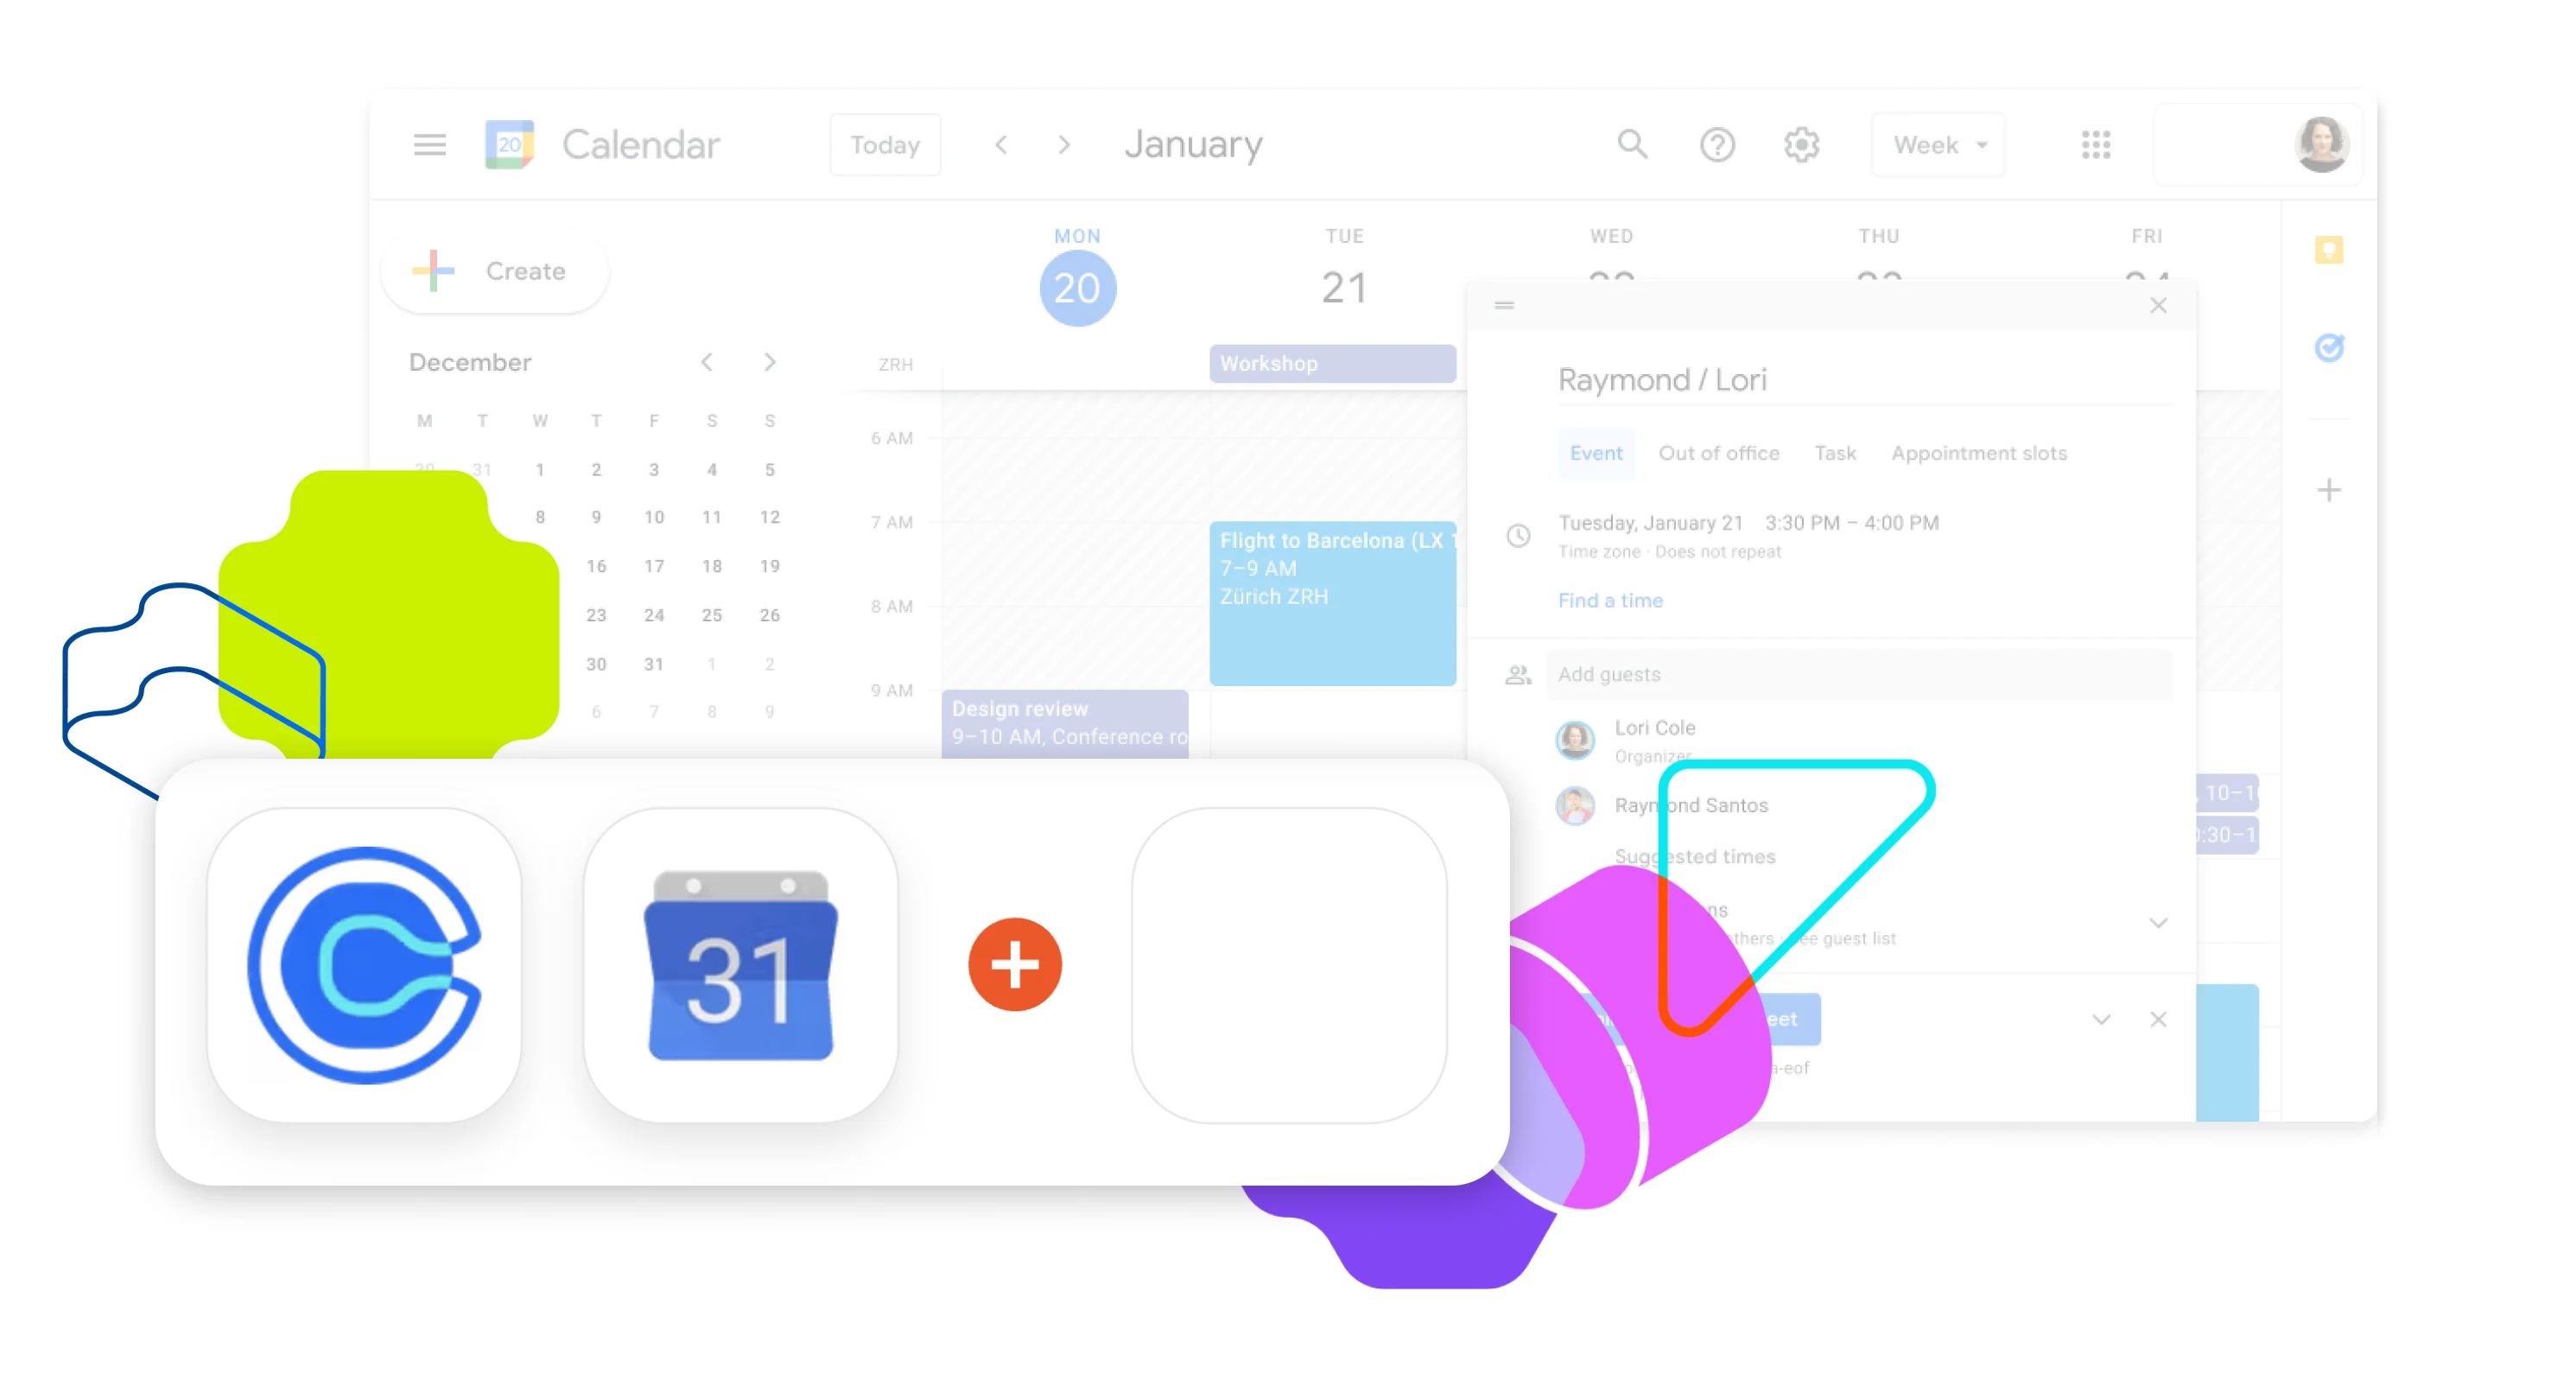 If you use your Google email to sign up for Calendly, then meetings will automatically show up in your Google Calendar.